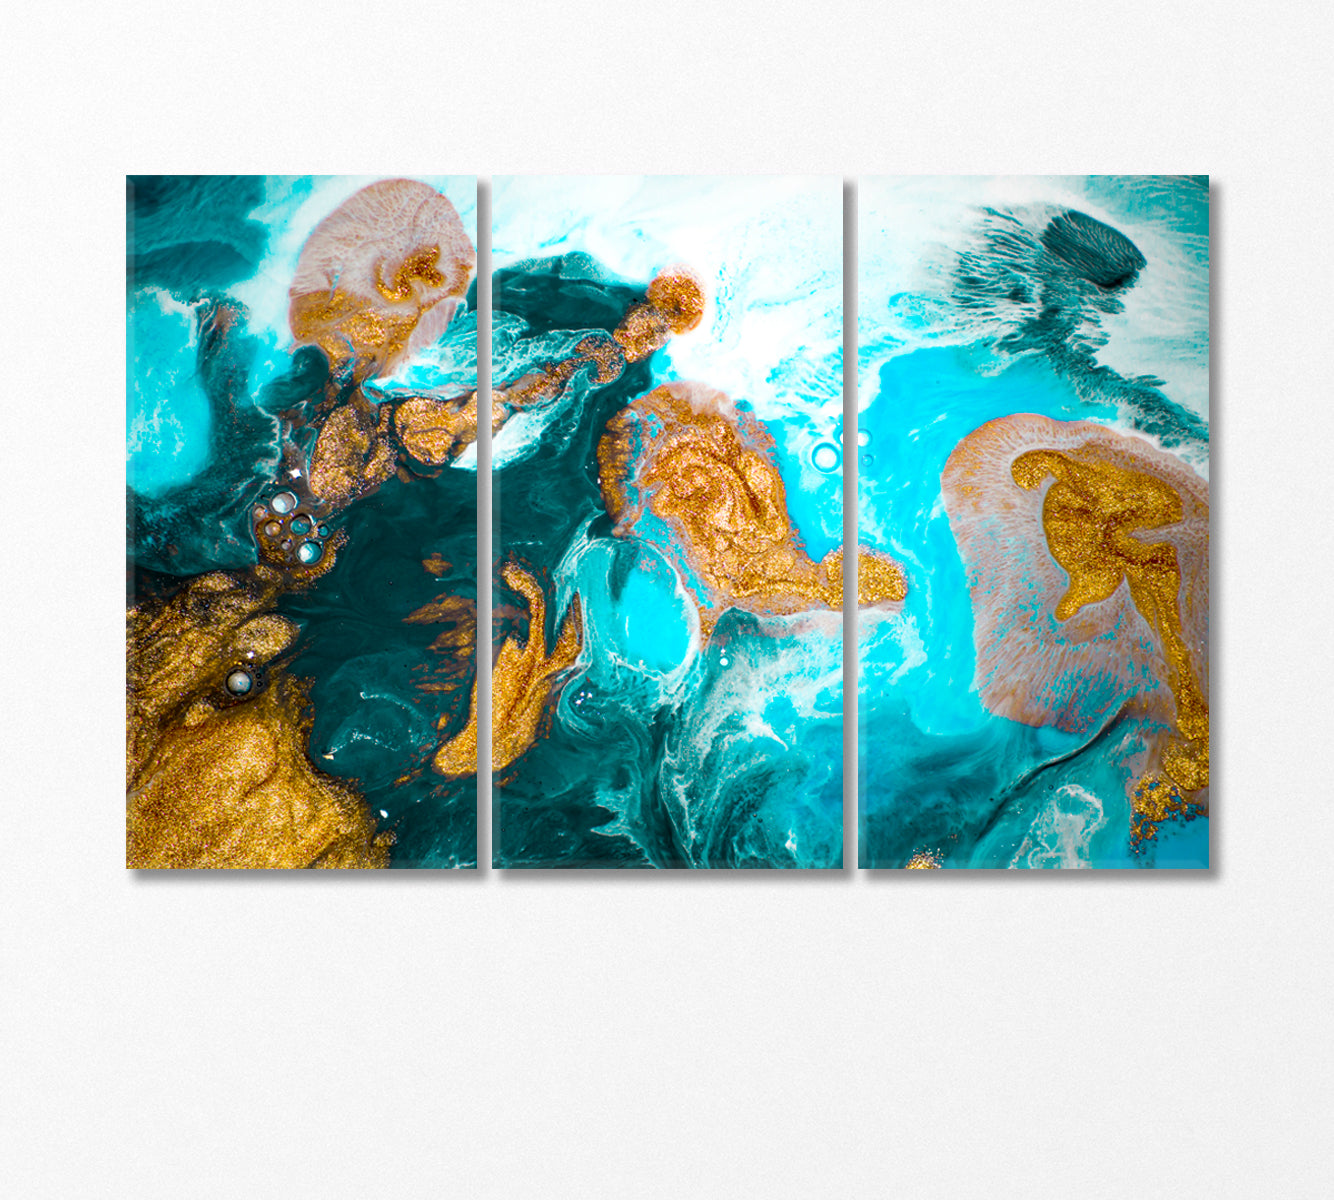 Standing Luxury Abstraction in Blue and Gold Canvas Print-Canvas Print-CetArt-3 Panels-36x24 inches-CetArt